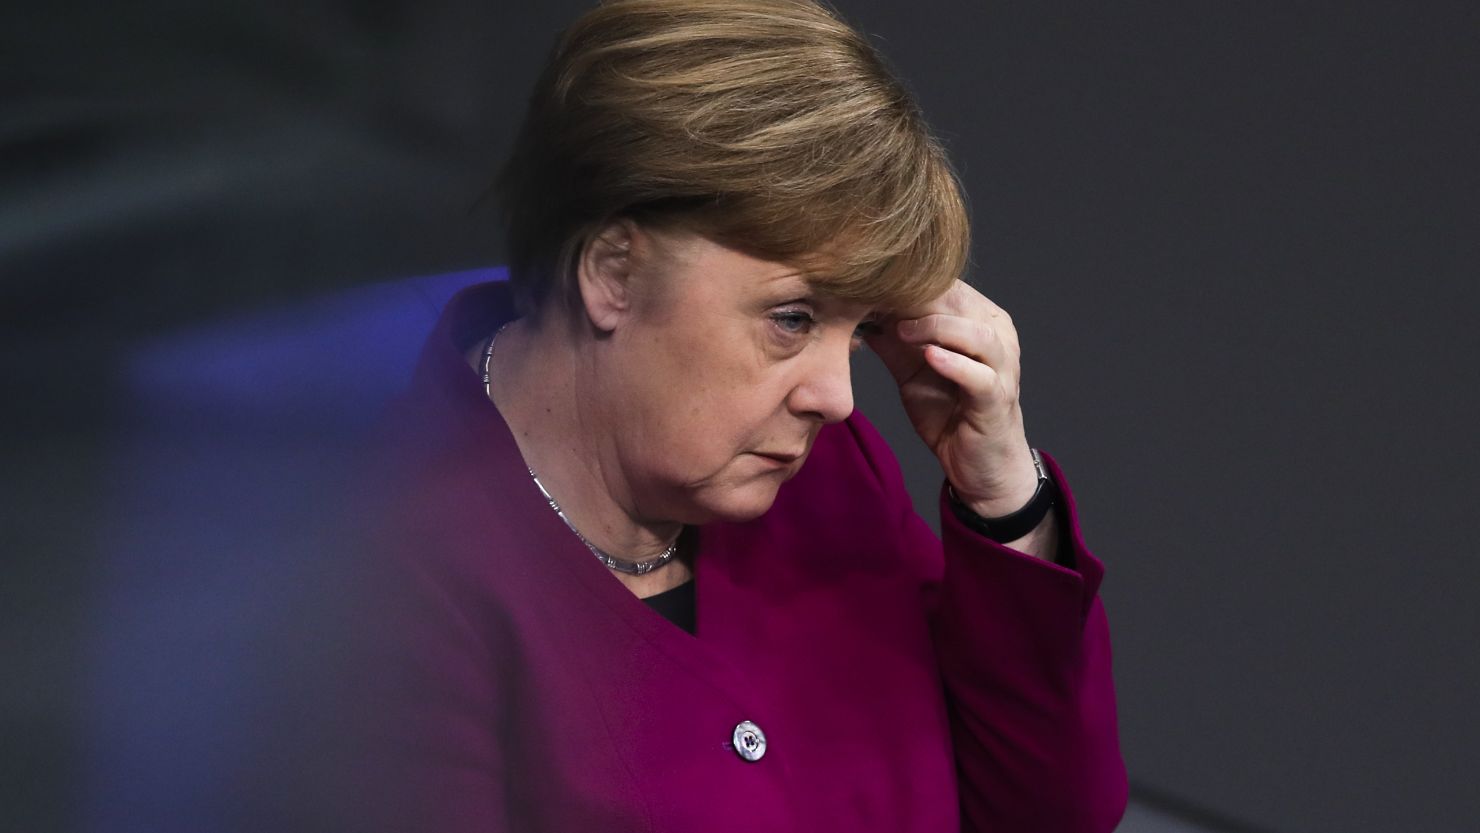 A new, Angela Merkel-led government is a step closer in Germany after the SPD vote.